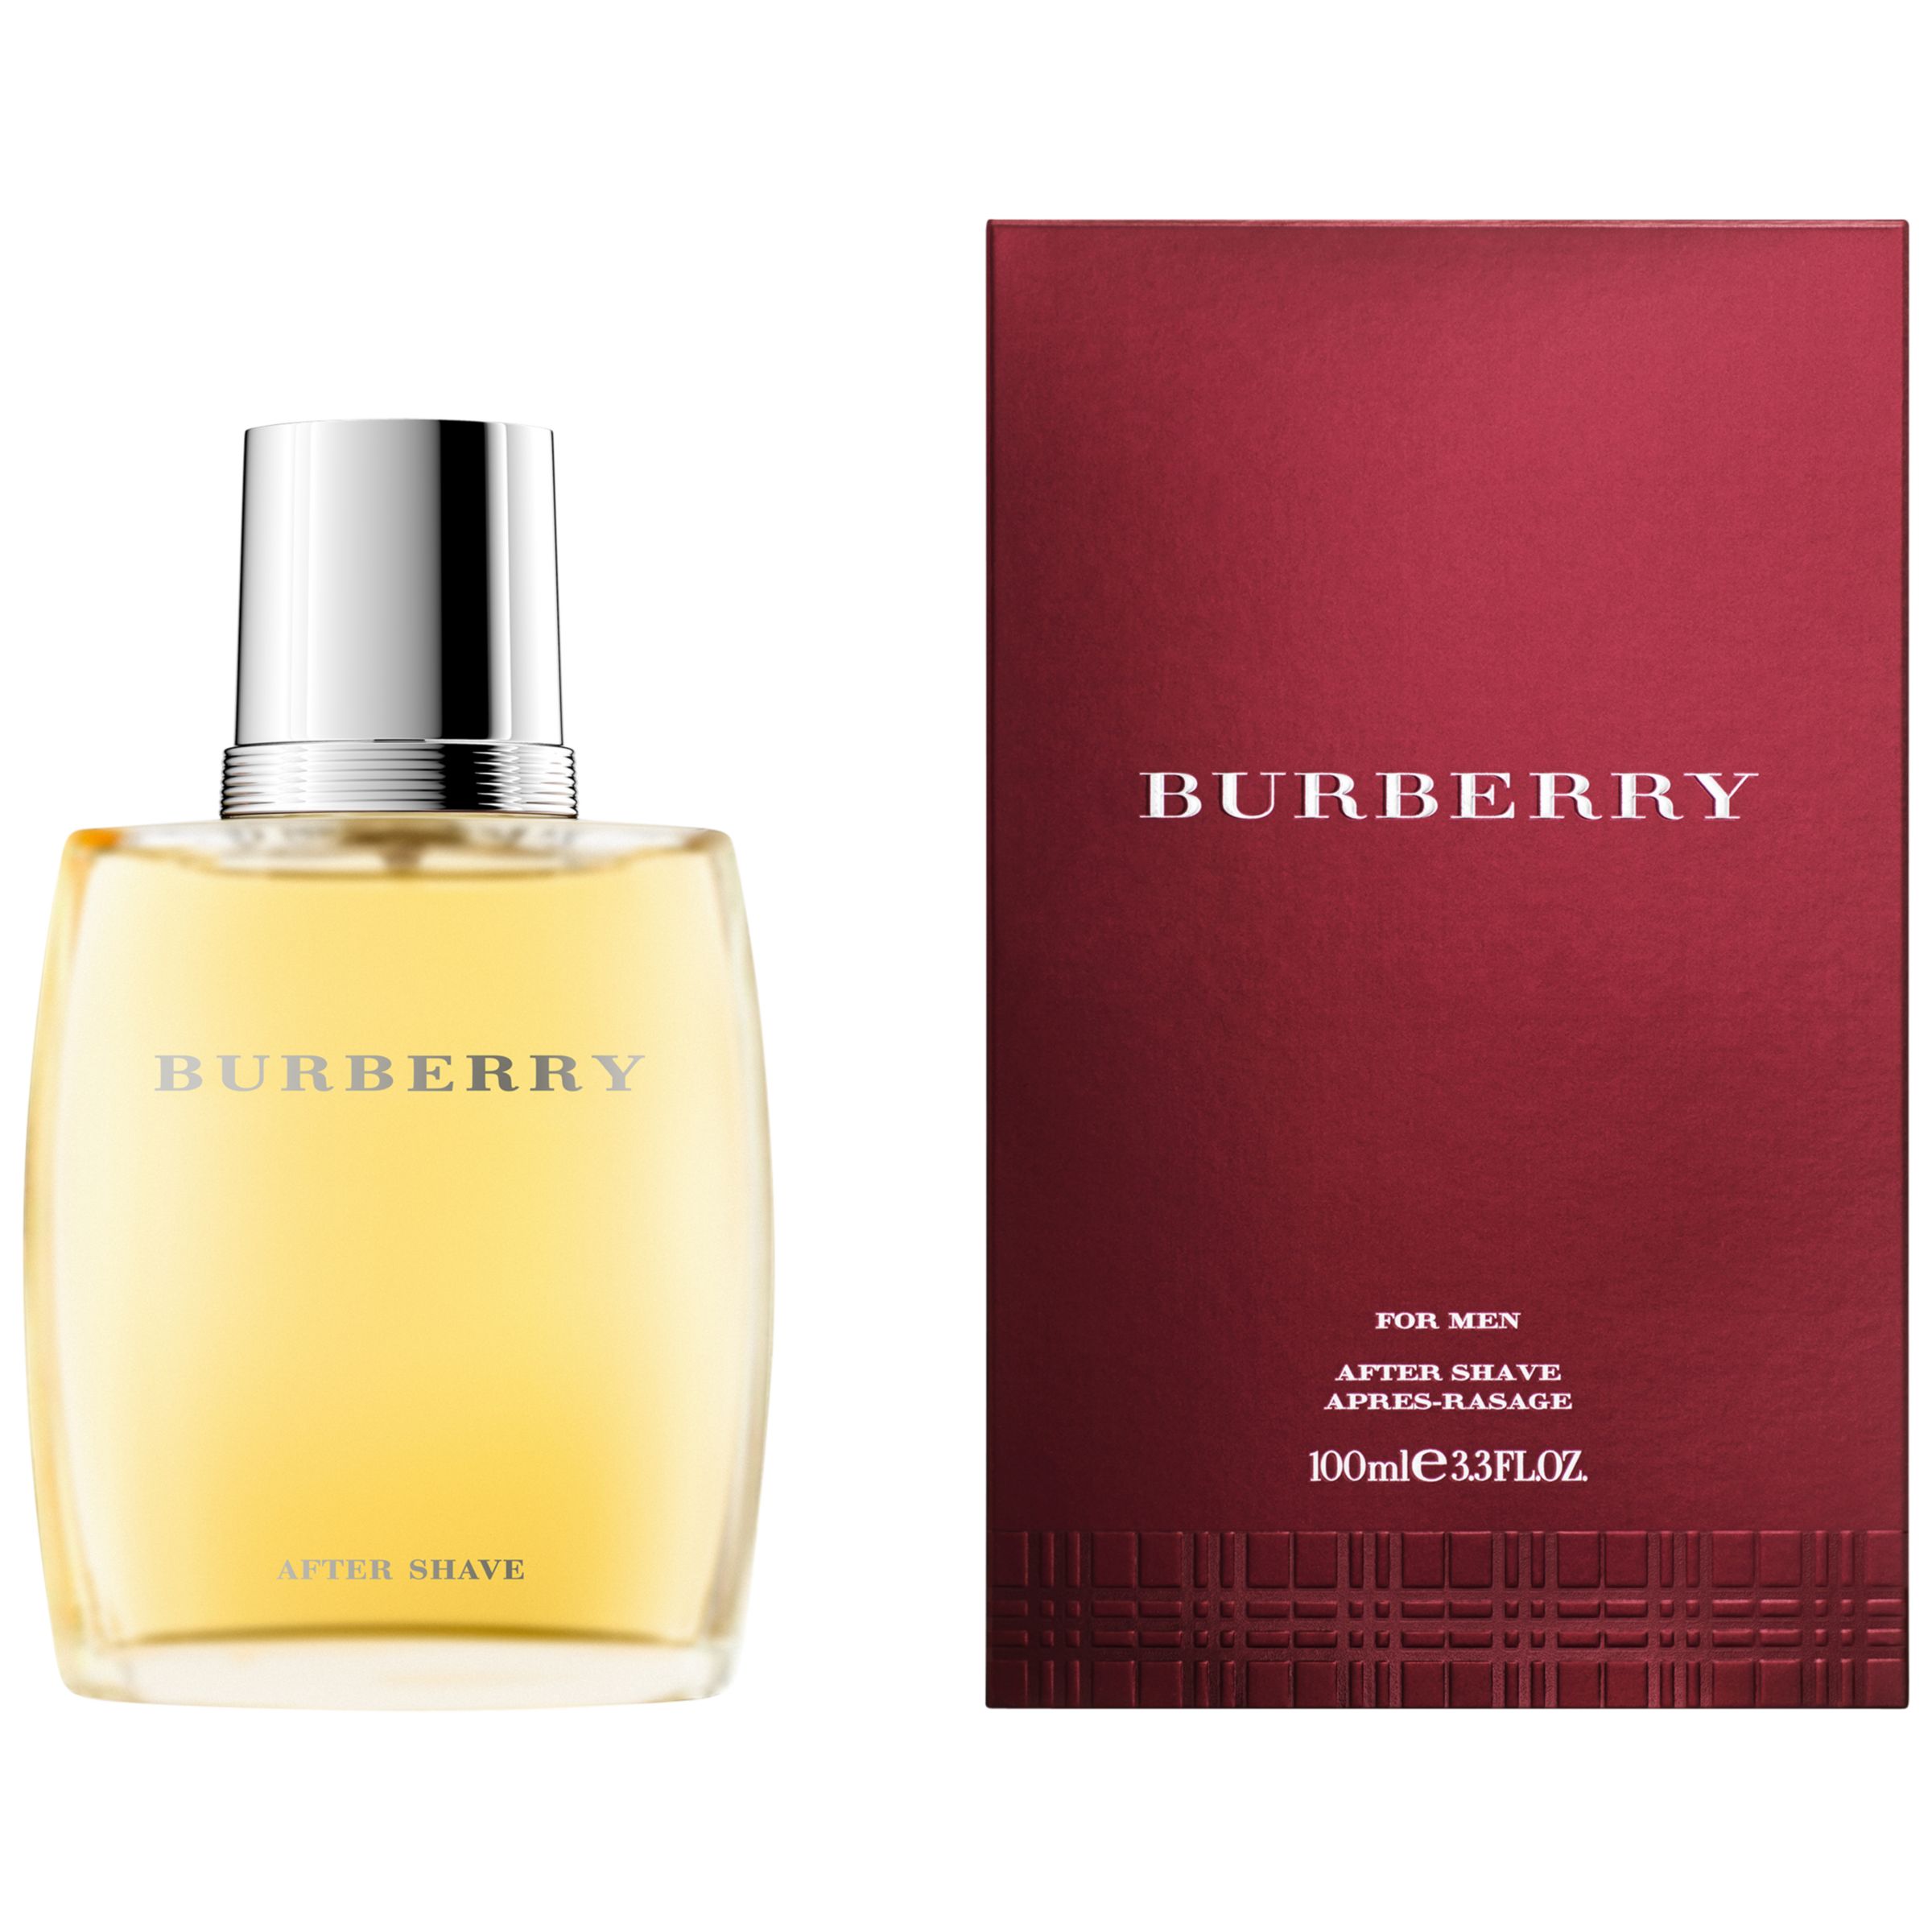 Burberry For Men Aftershave, 100ml at 